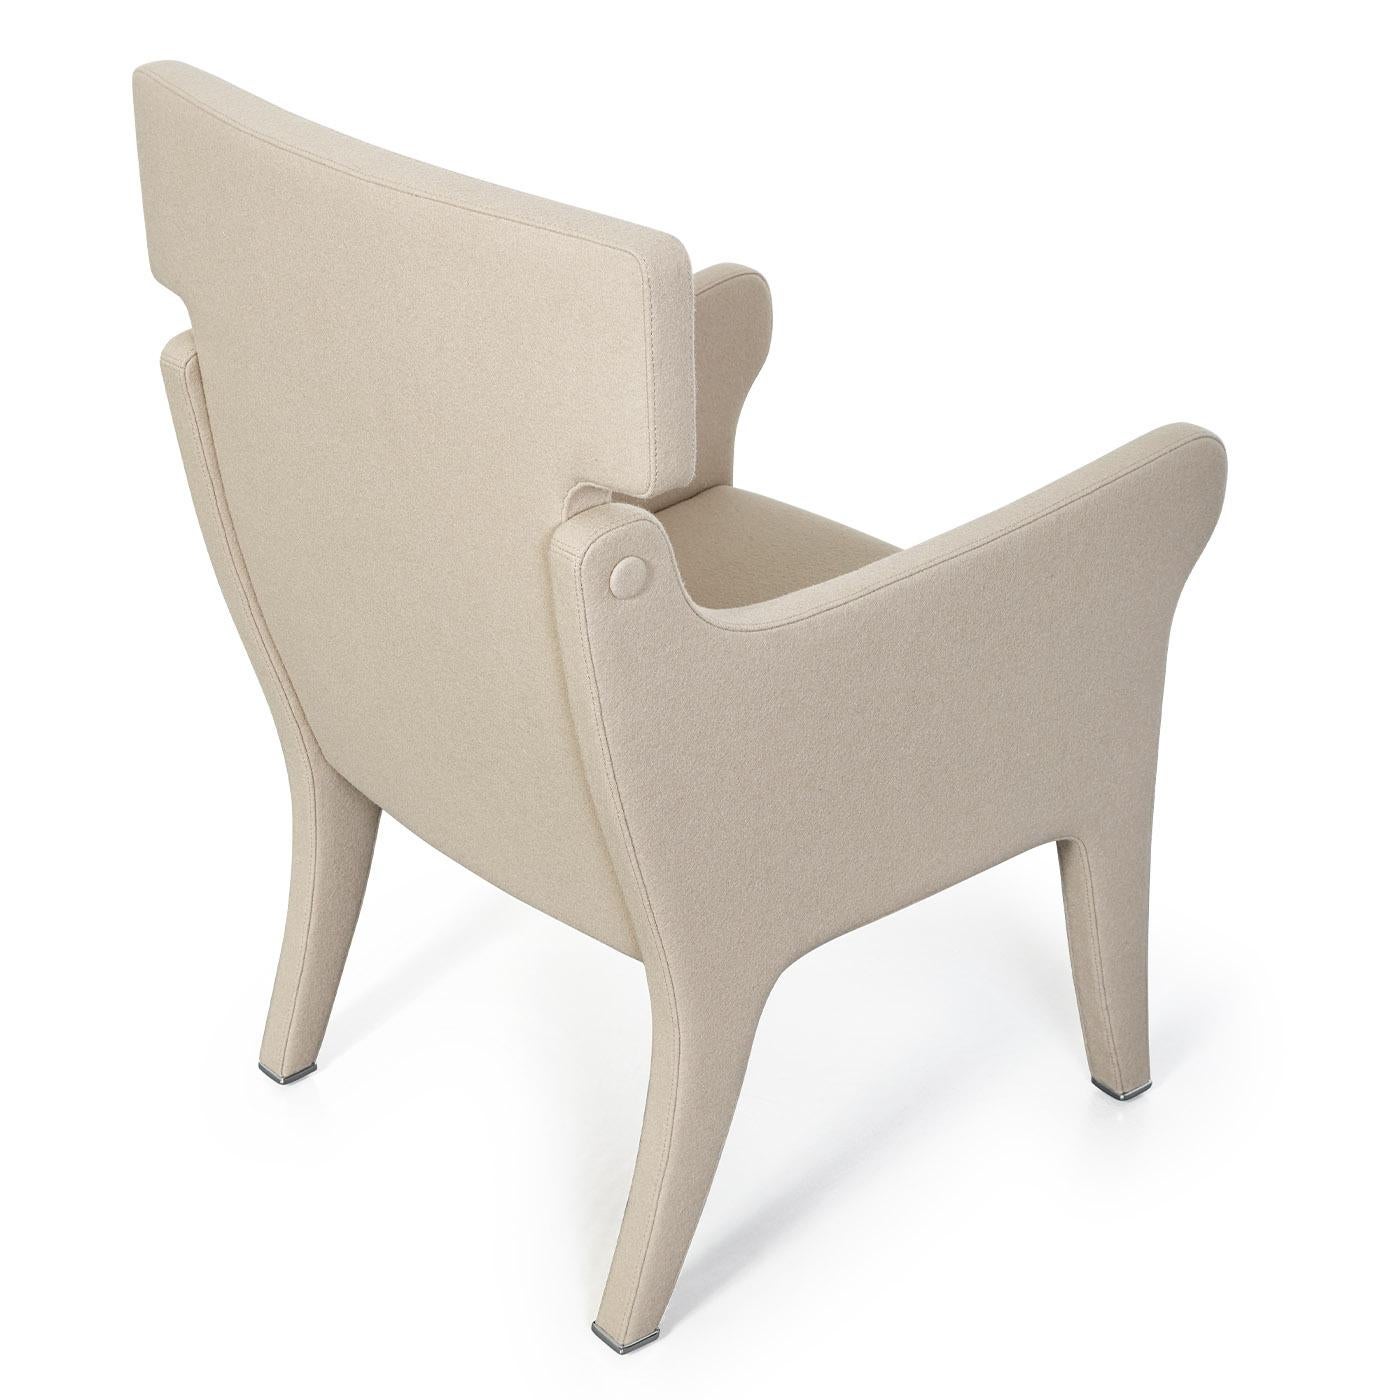 An exquisite design of iconic contemporary flair, this armchair by Ignazio Gardella is distinguished by a felt wool upholstery that covers its entire shape. Rendered in a cream-white tone also available in other hues, it features a rigid wooden